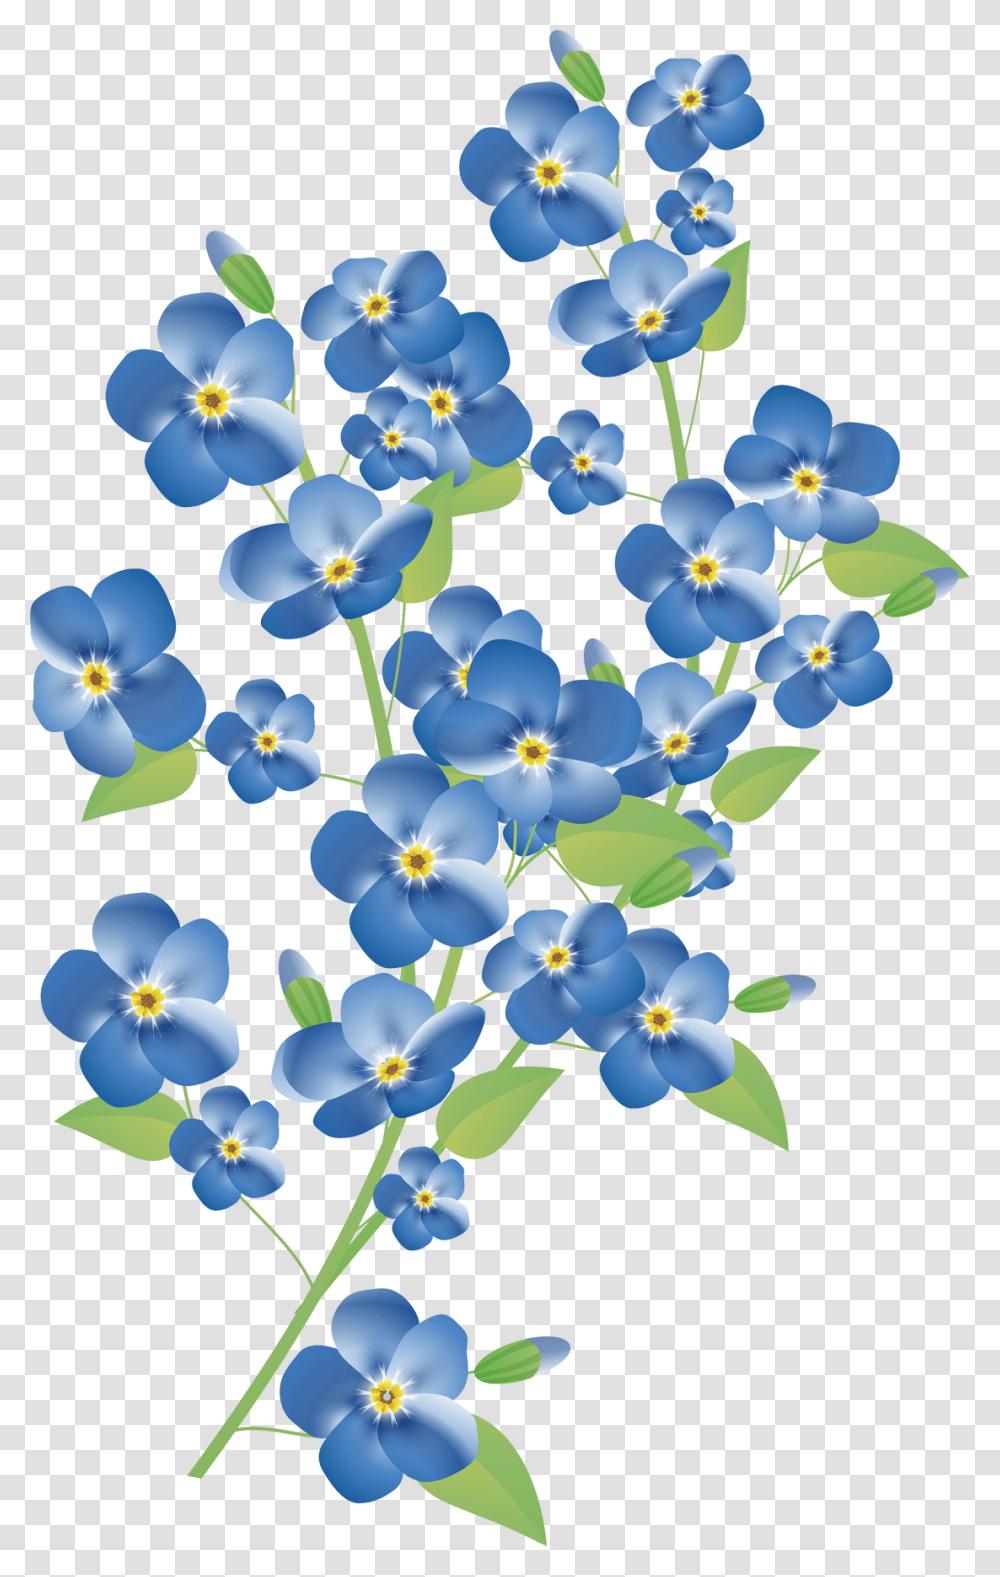 Forget Me Not Pic Forget Me Not Flower, Plant, Blossom, Network, Balloon Transparent Png